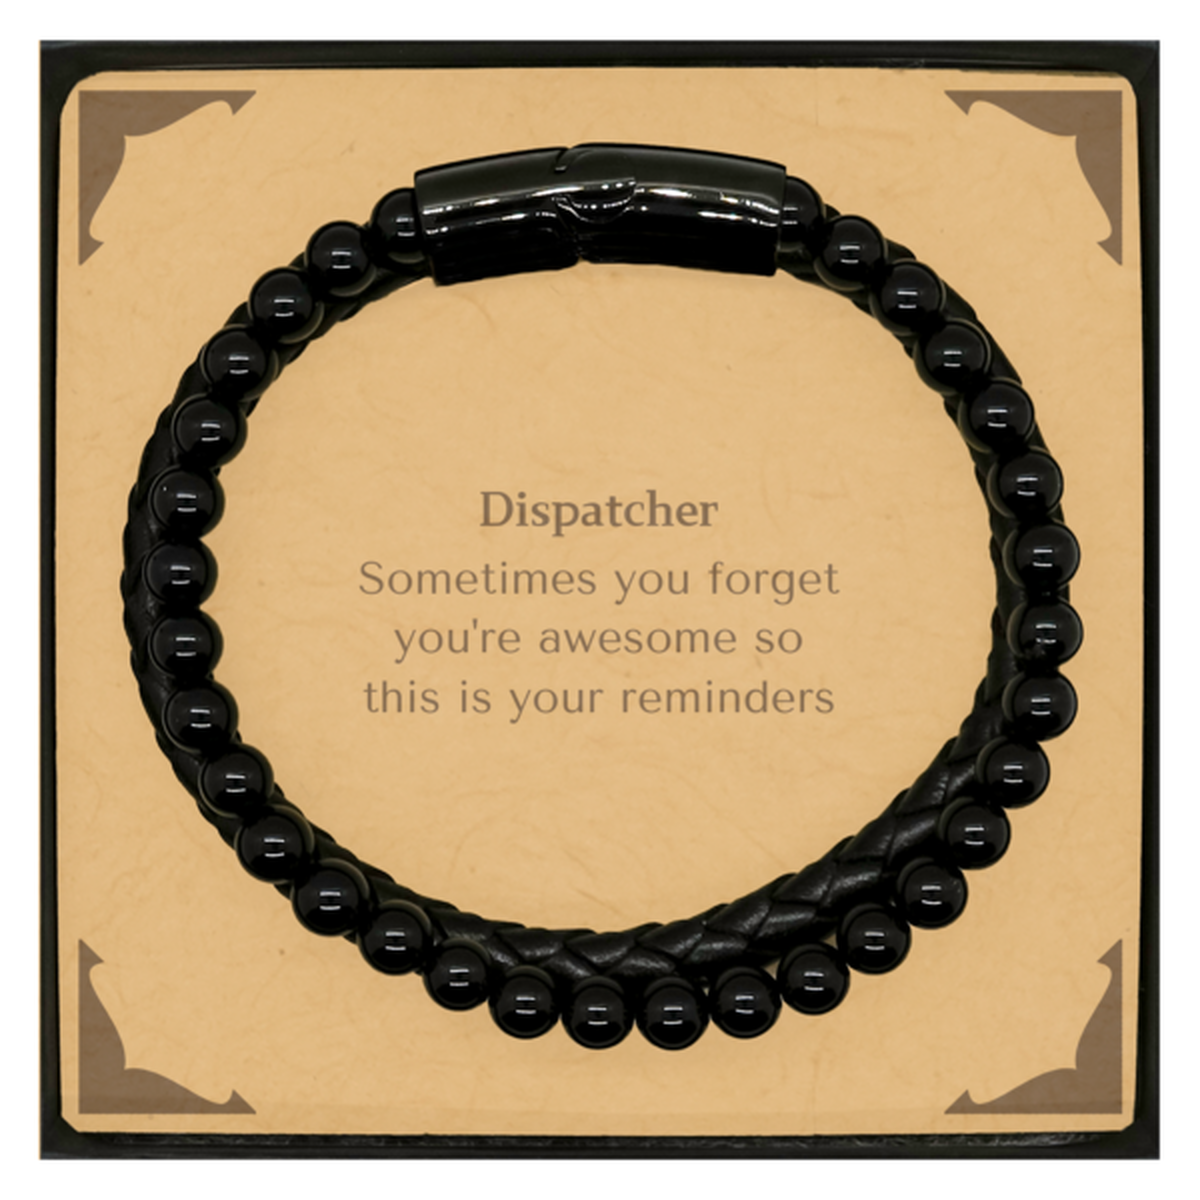 Sentimental Dispatcher Stone Leather Bracelets, Dispatcher Sometimes you forget you're awesome so this is your reminders, Graduation Christmas Birthday Gifts for Dispatcher, Men, Women, Coworkers